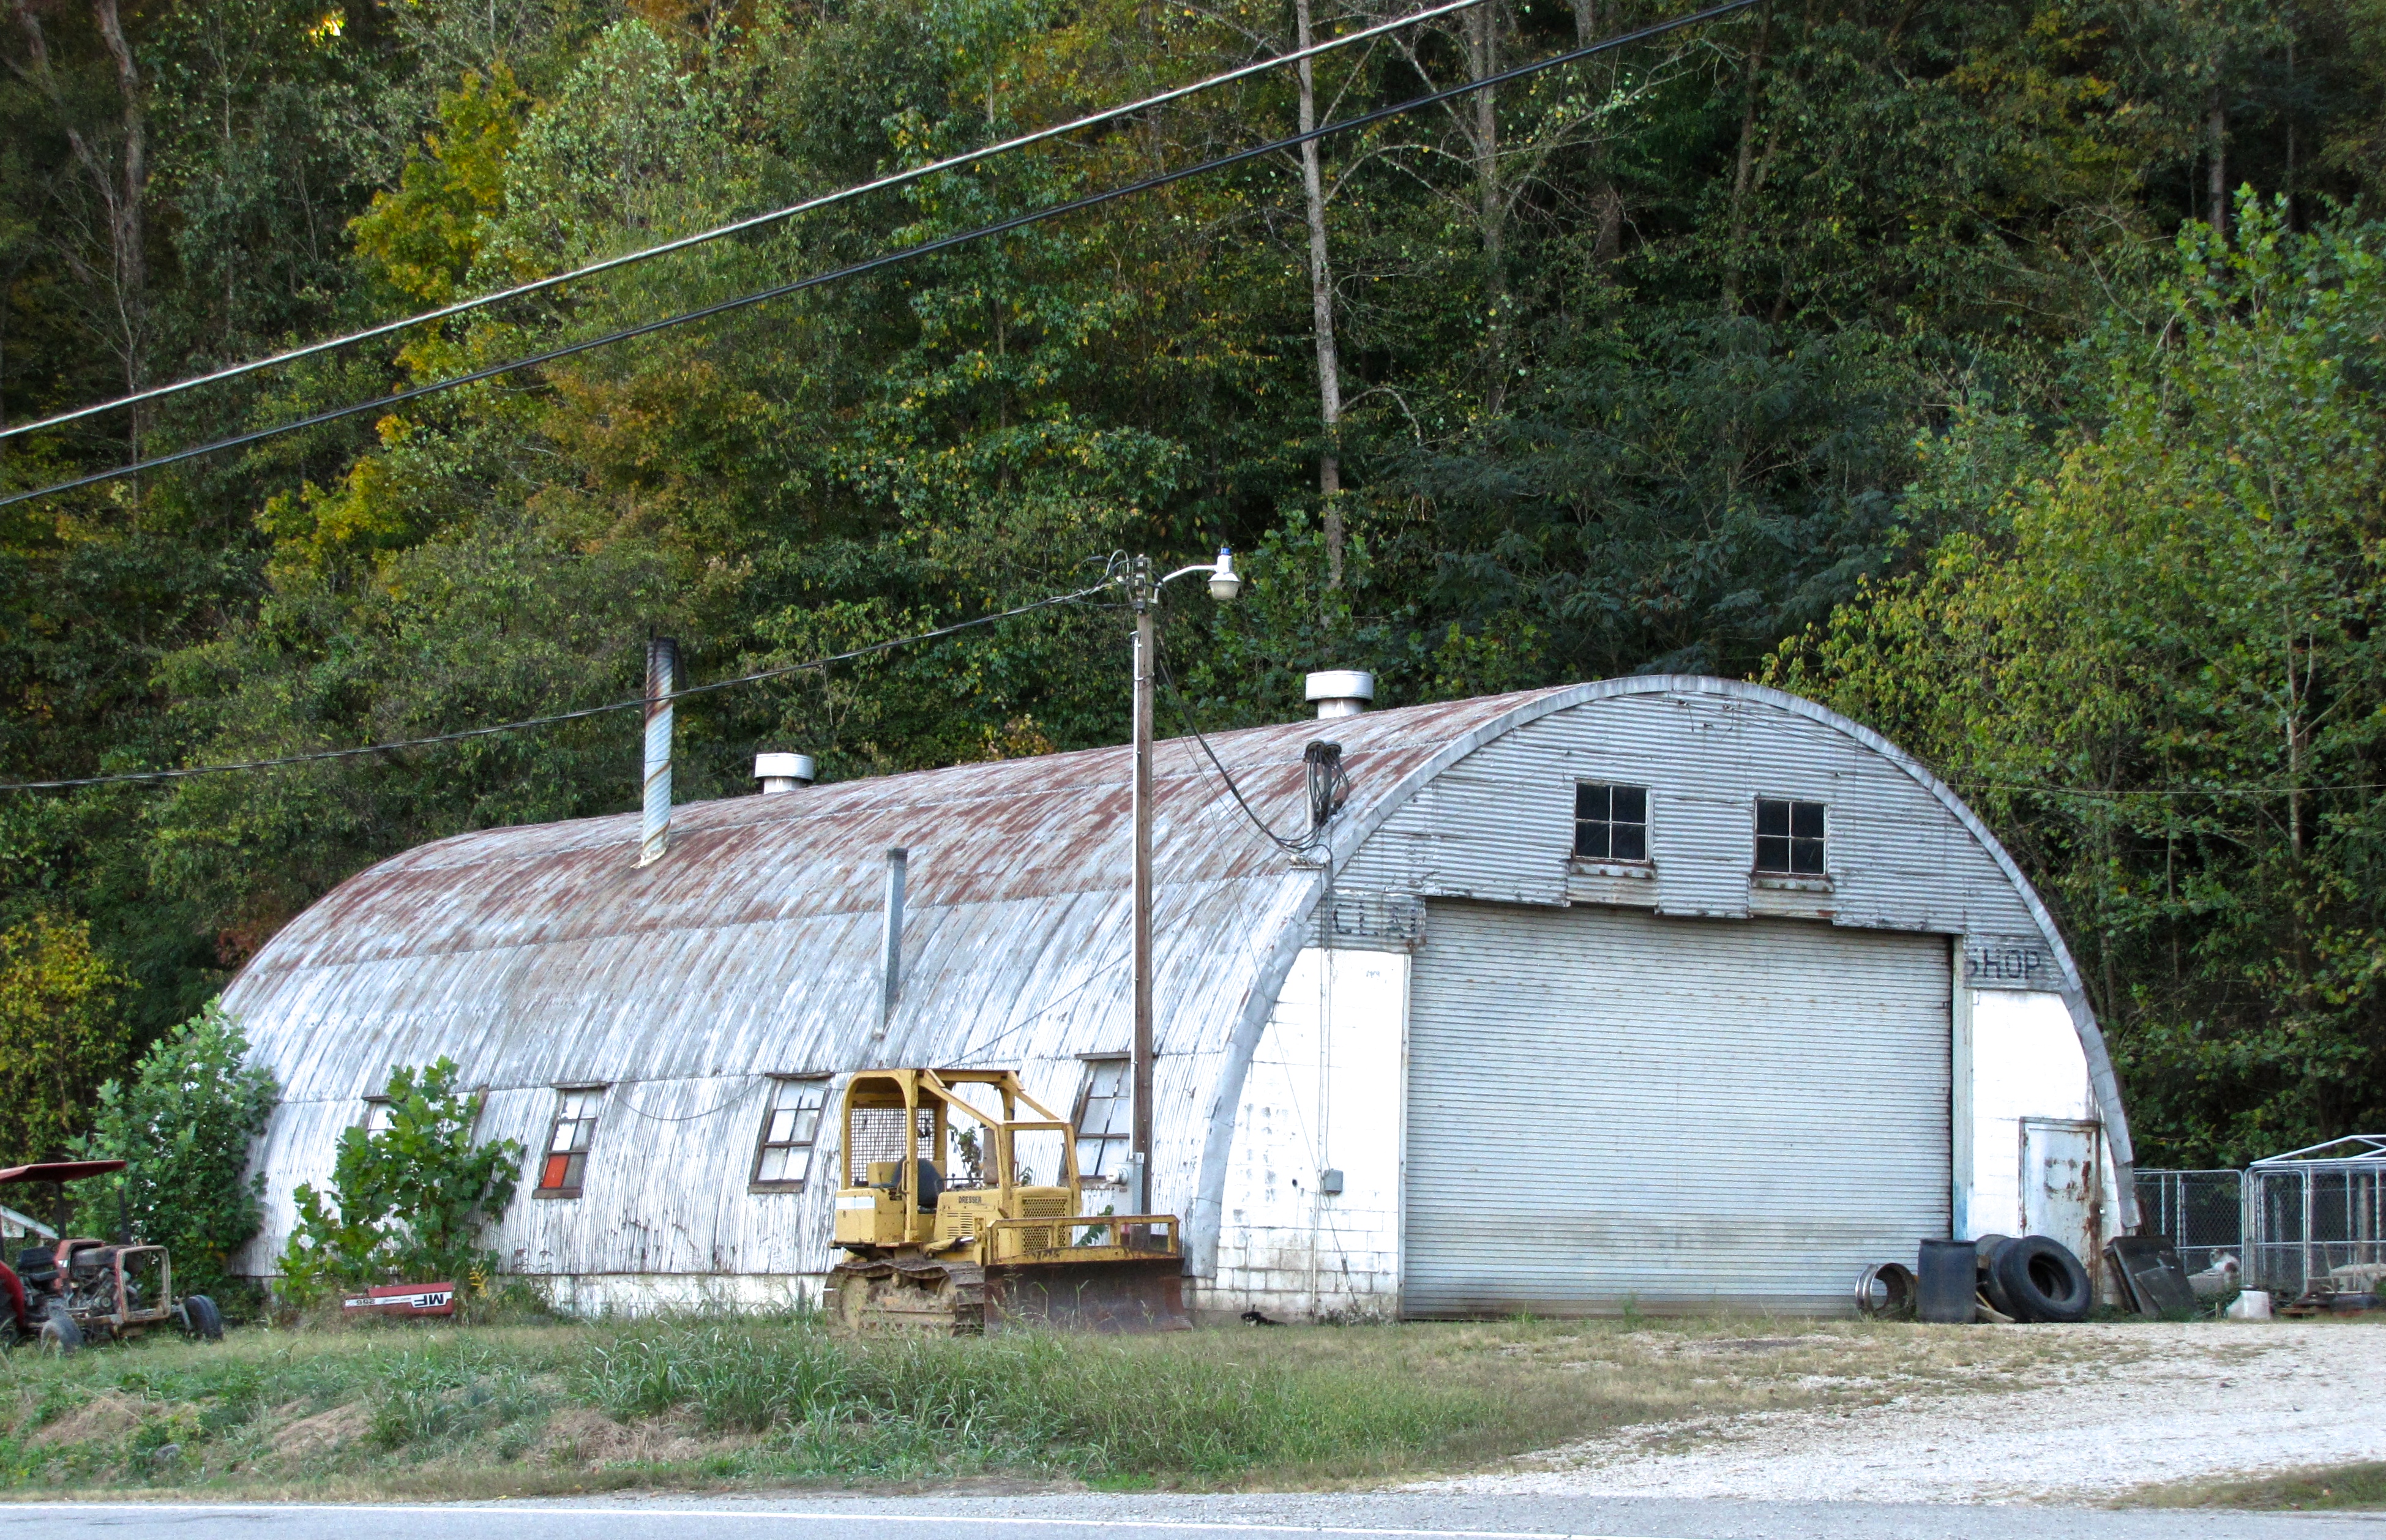 quonset hut in Privacy Policy, GA